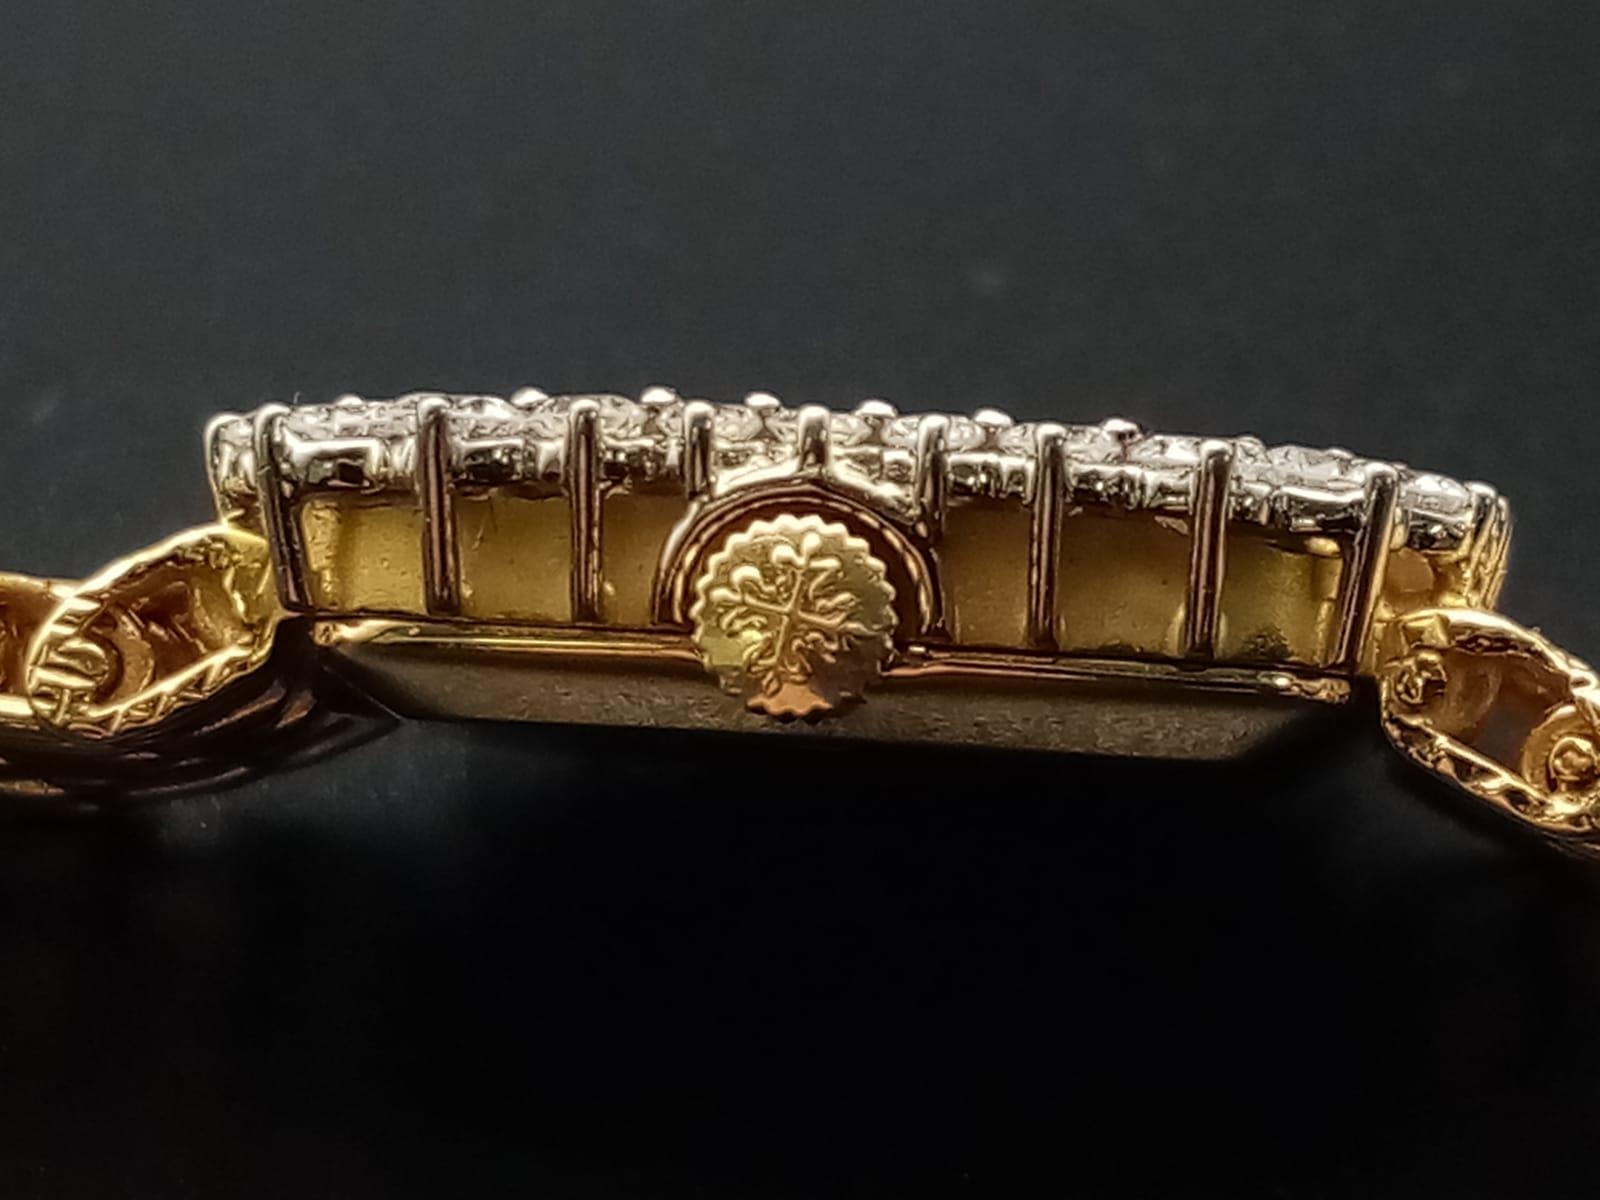 A Patek Phillipe Classic 18K Gold and Diamond Ladies Watch. Woven gold bracelet. Gold case - 24mm. - Image 11 of 11